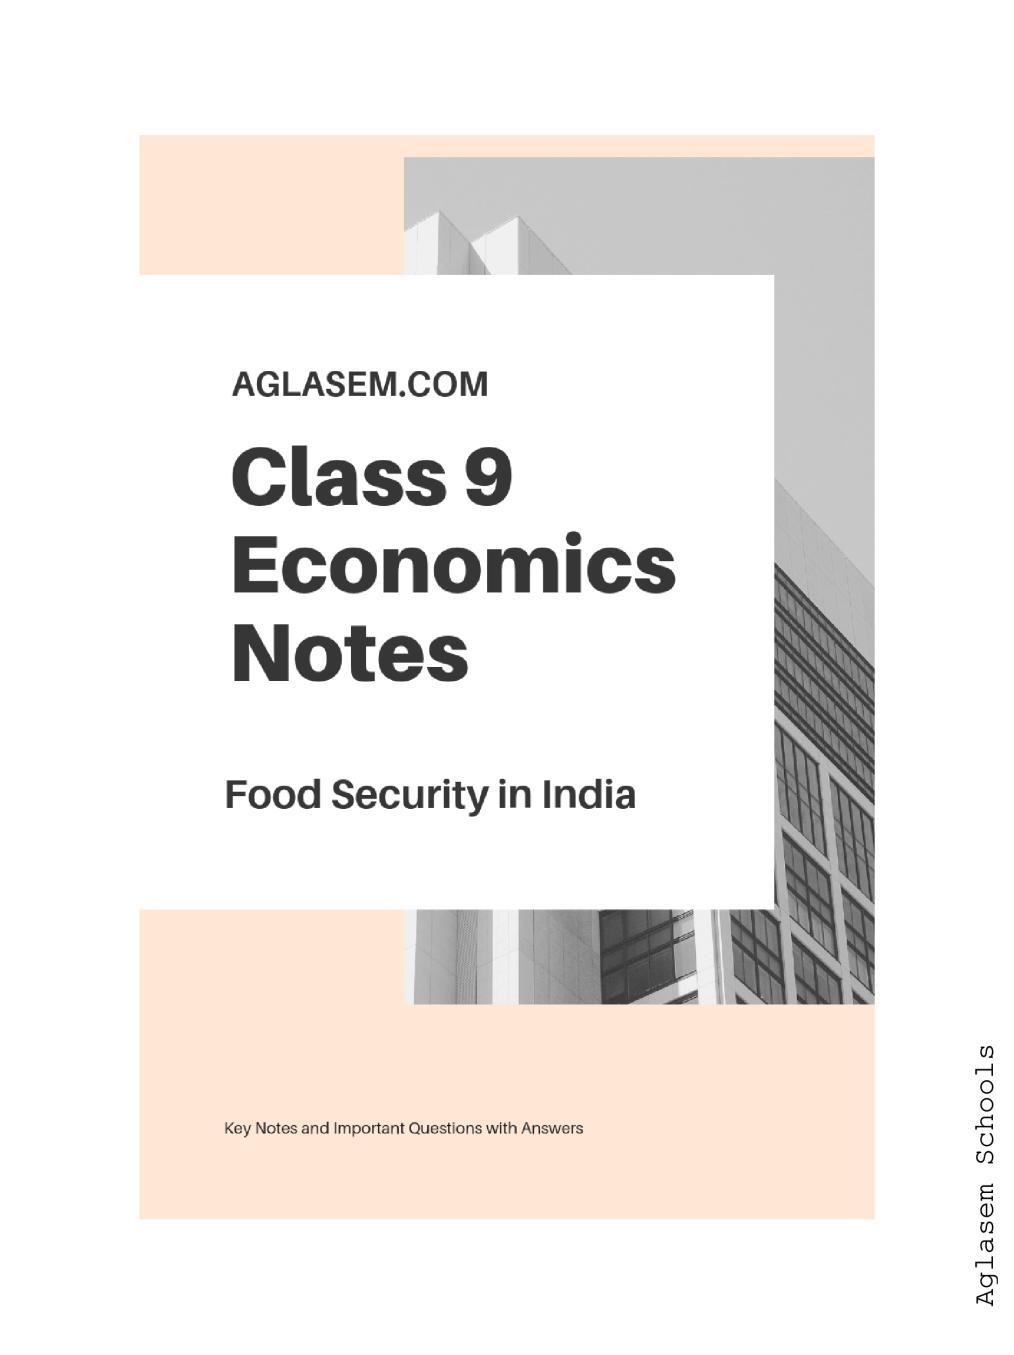 Class 9 Social Science Economics Notes for Food Security in India - Page 1